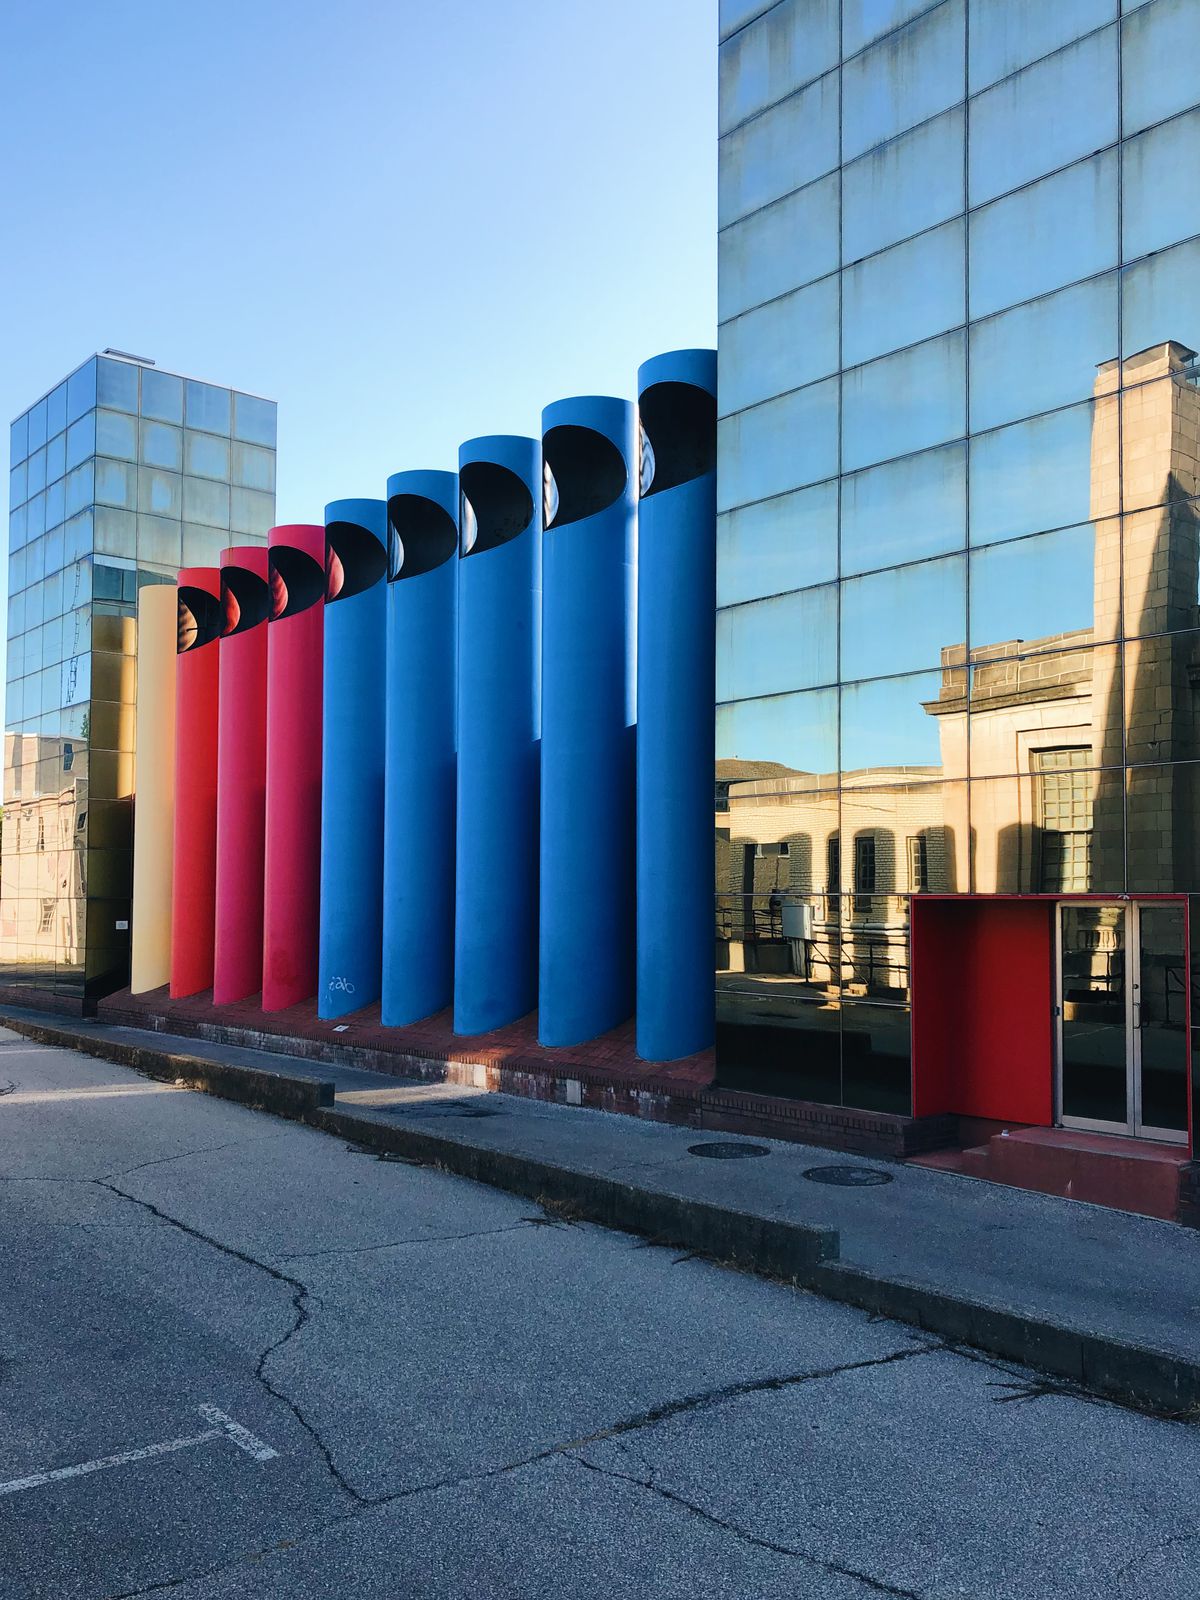 Two all-glass buildings encase eight tall columns, three red and five blue.